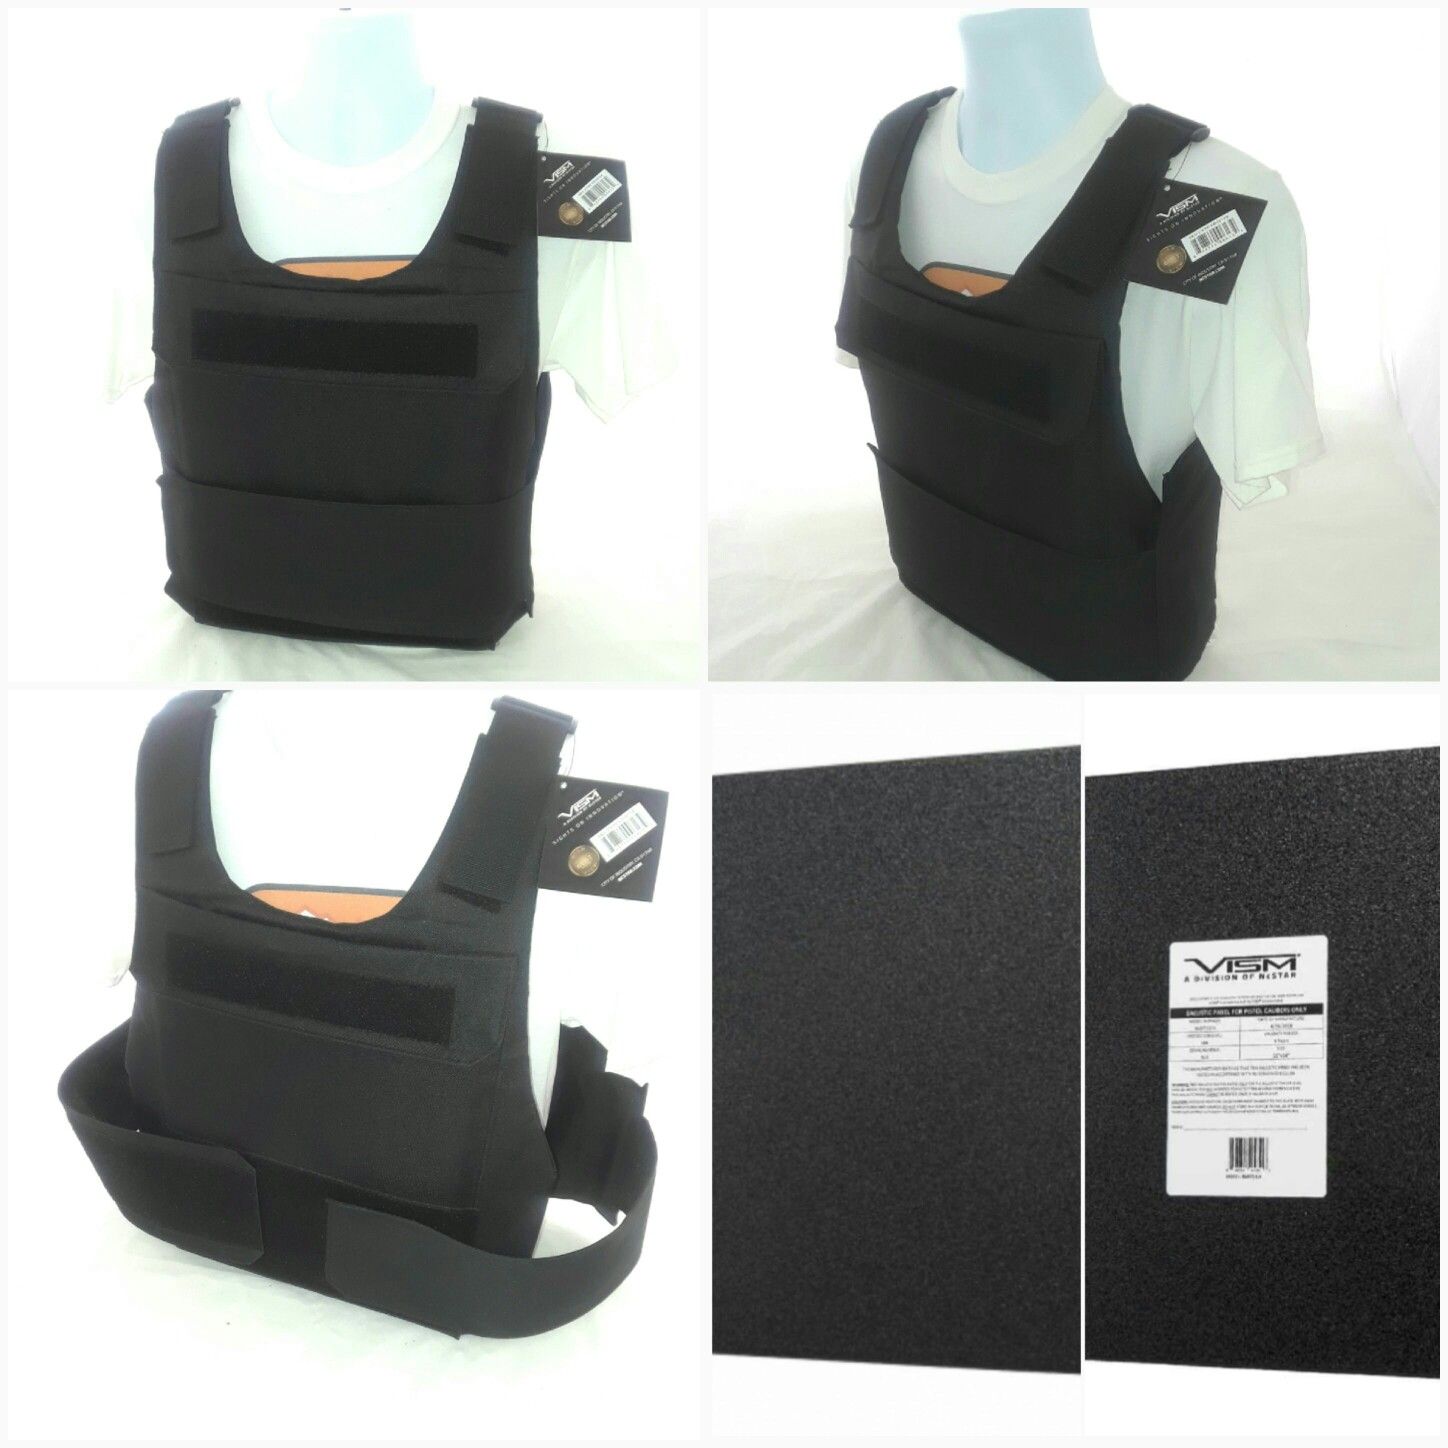 SALE $180 NEW NCSTAR DISCREET CARRIER M-4XL INCLUDES 11X14 HARD PANELS